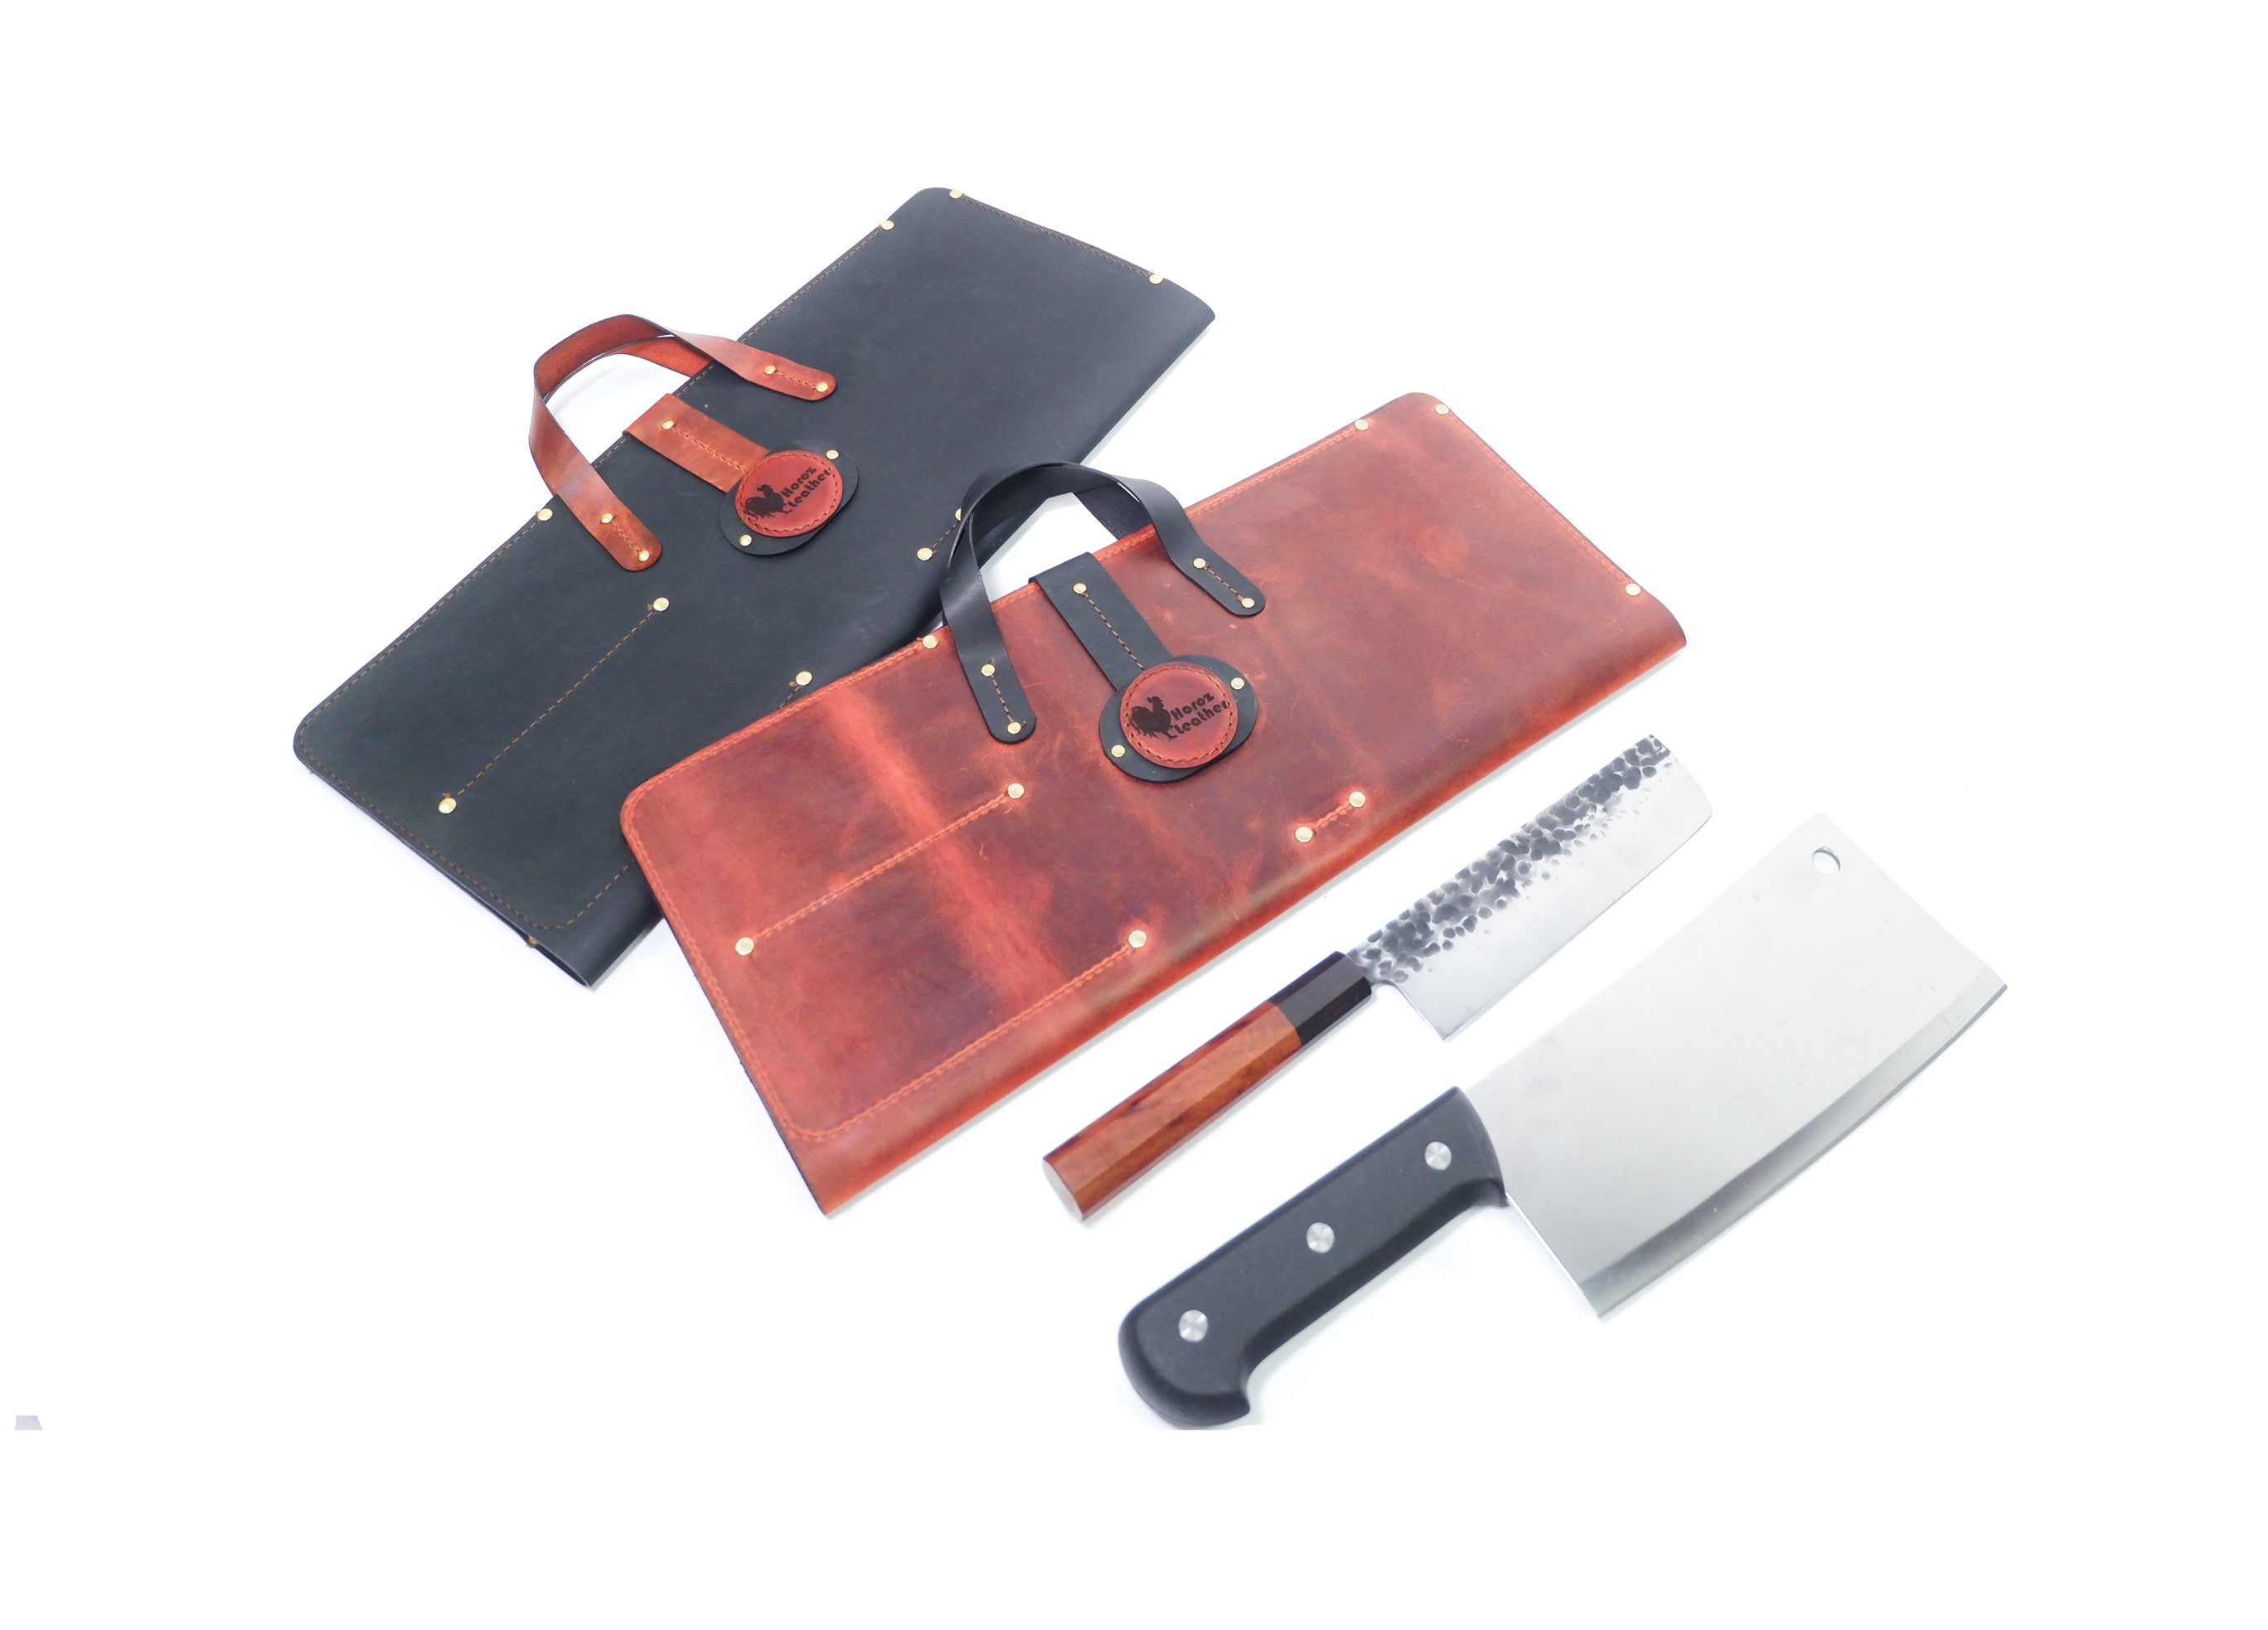 8-Slot Leather Chef Knife Carrier